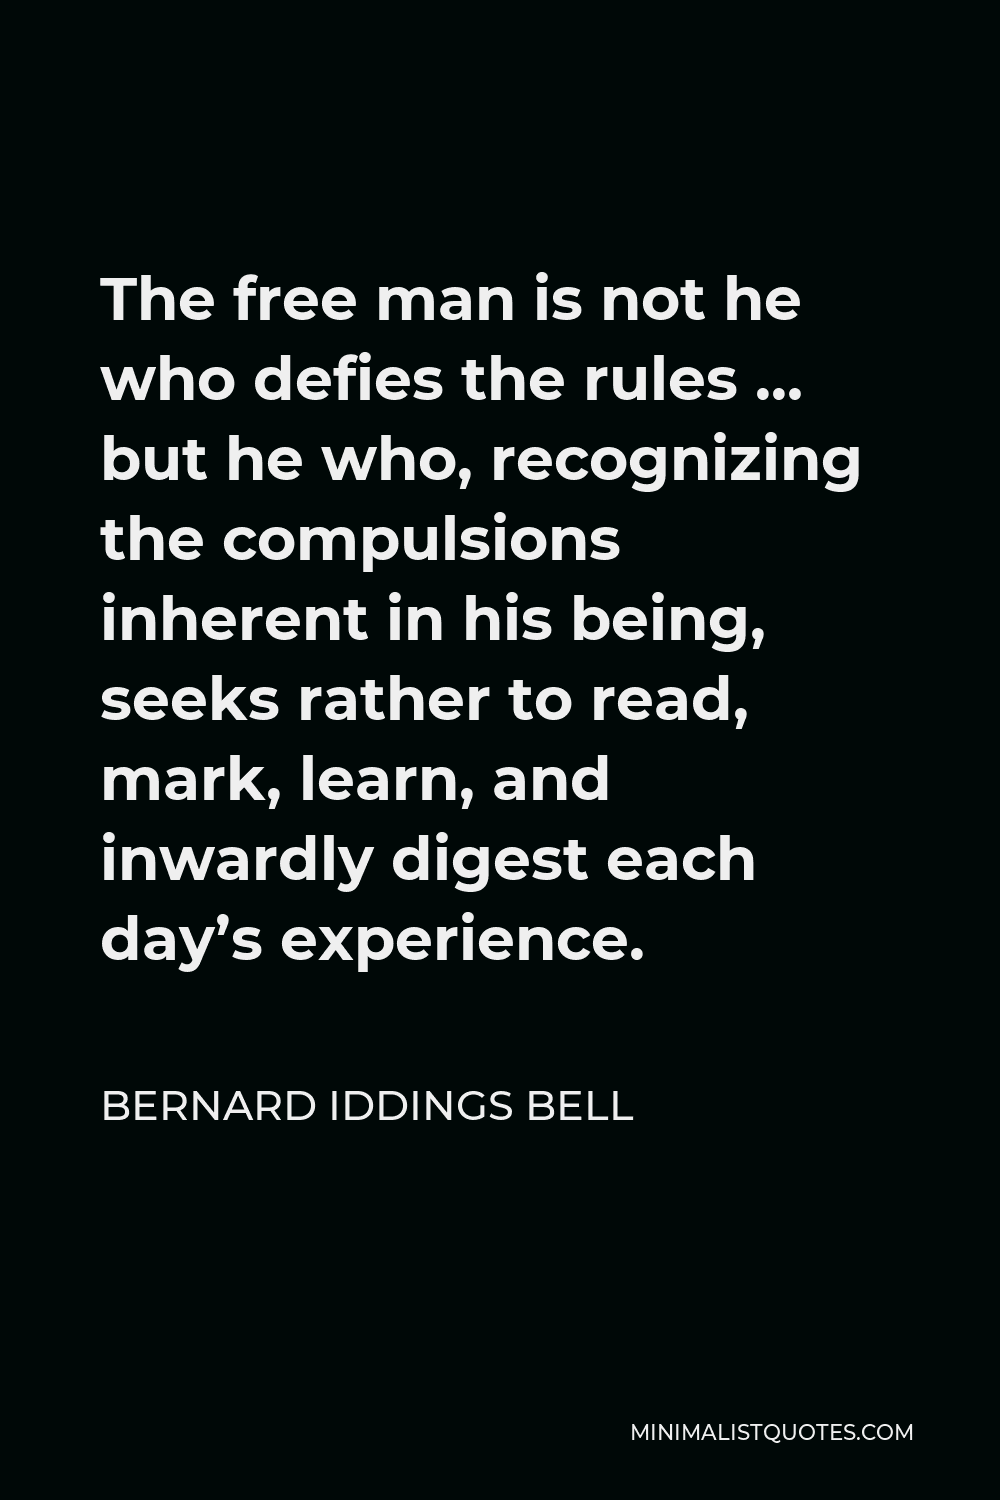 Bernard Iddings Bell Quote - The free man is not he who defies the rules … but he who, recognizing the compulsions inherent in his being, seeks rather to read, mark, learn, and inwardly digest each day’s experience.